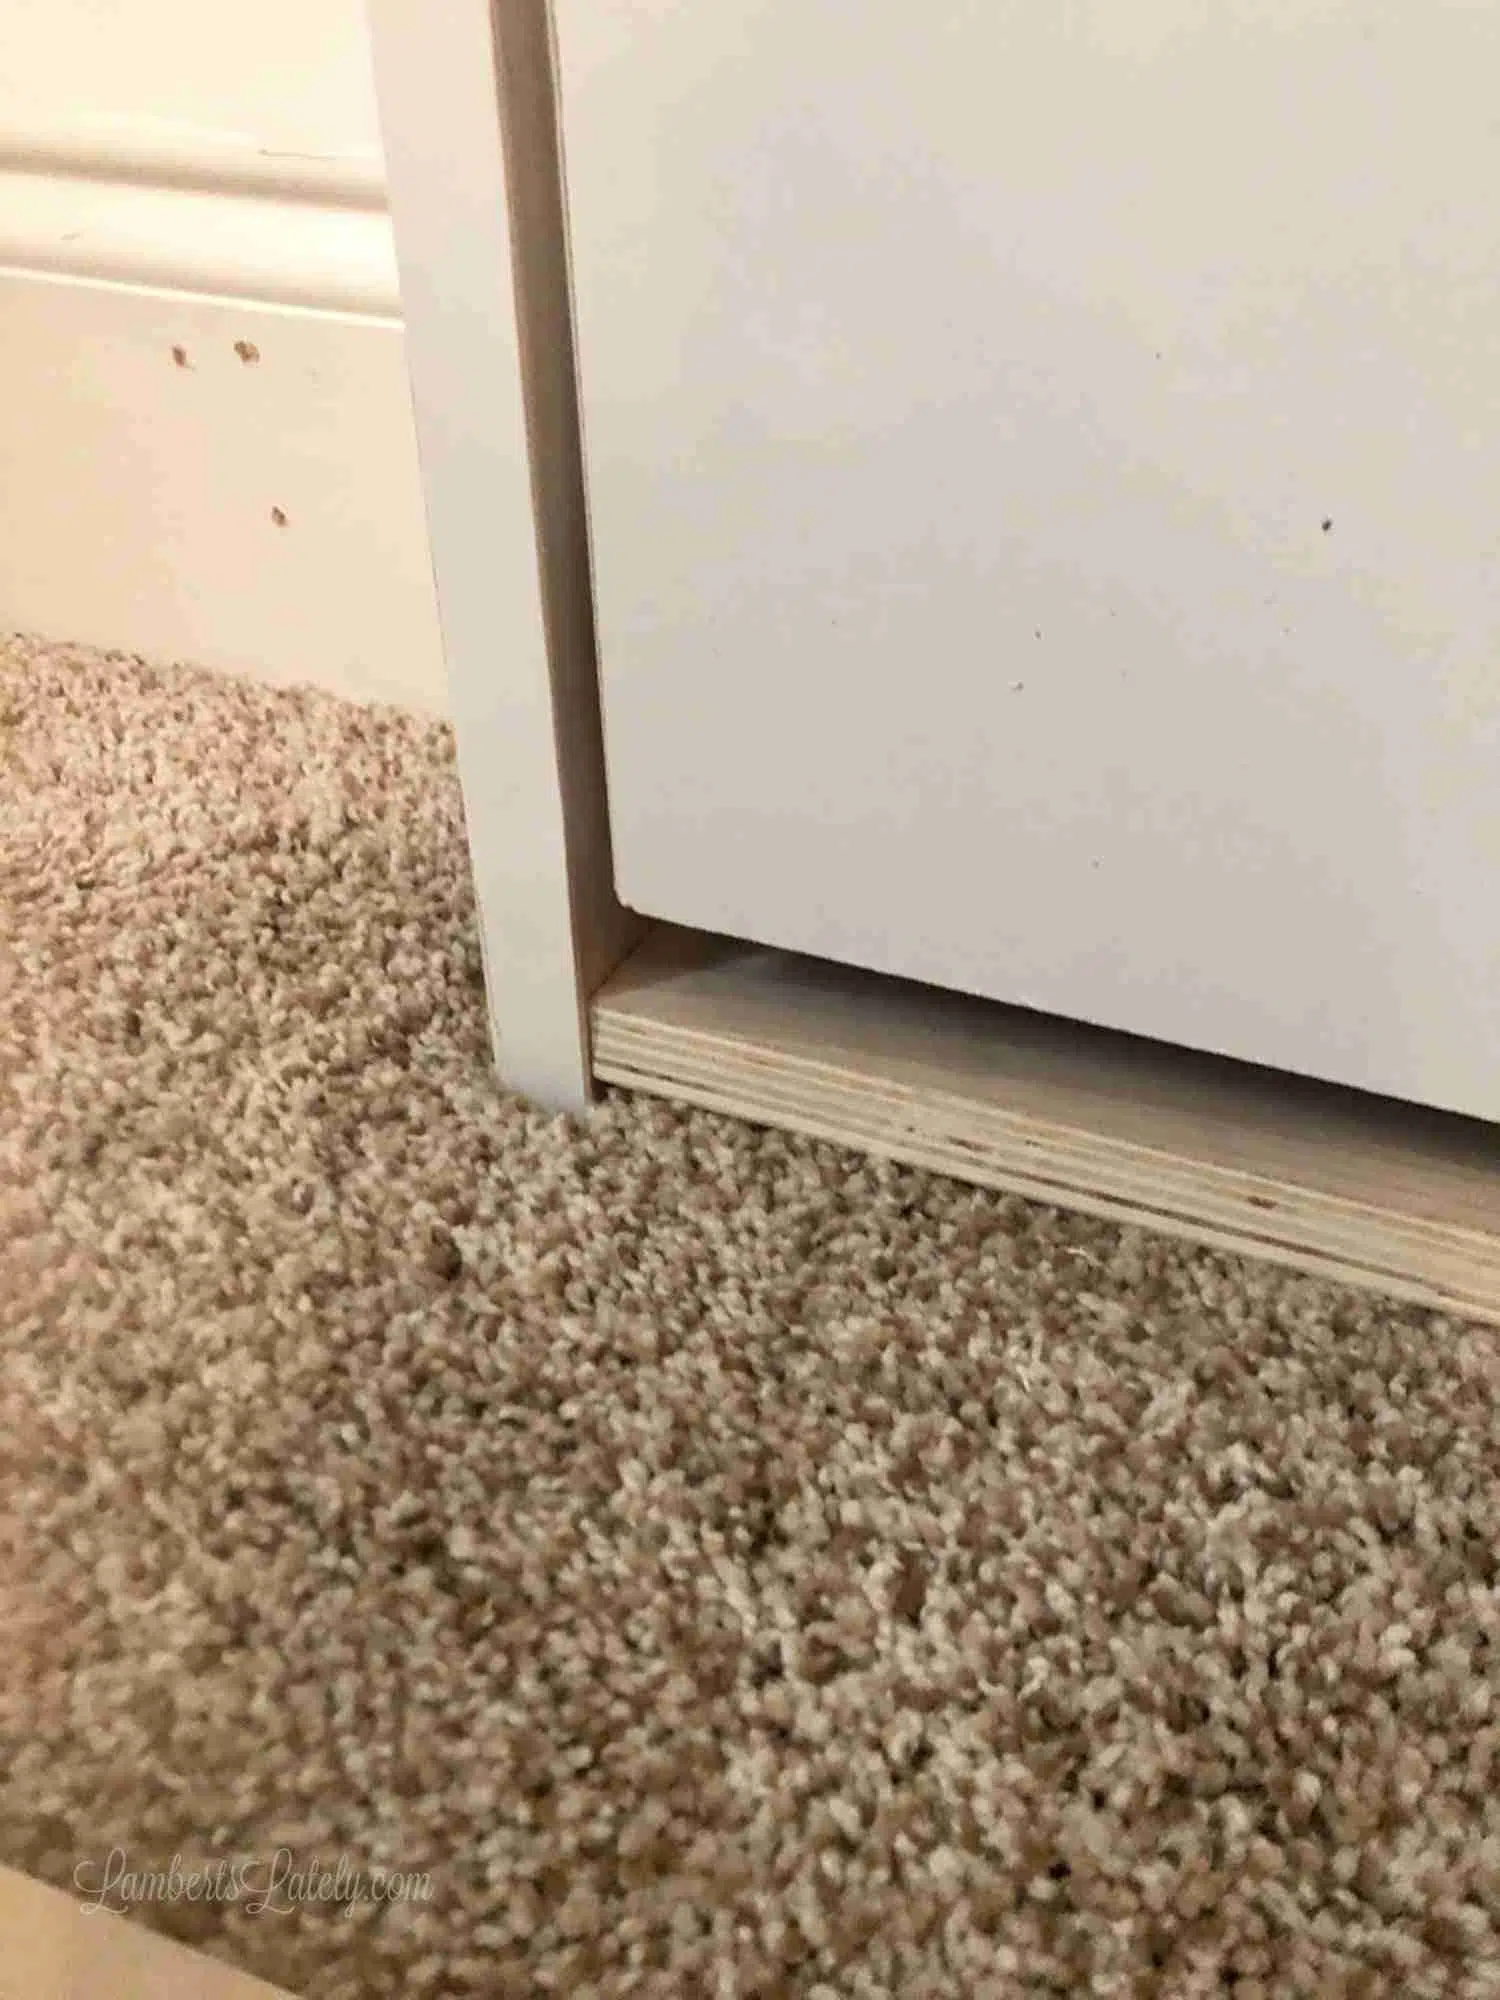 small gap at the bottom of the murphy bed to allow bed to open.